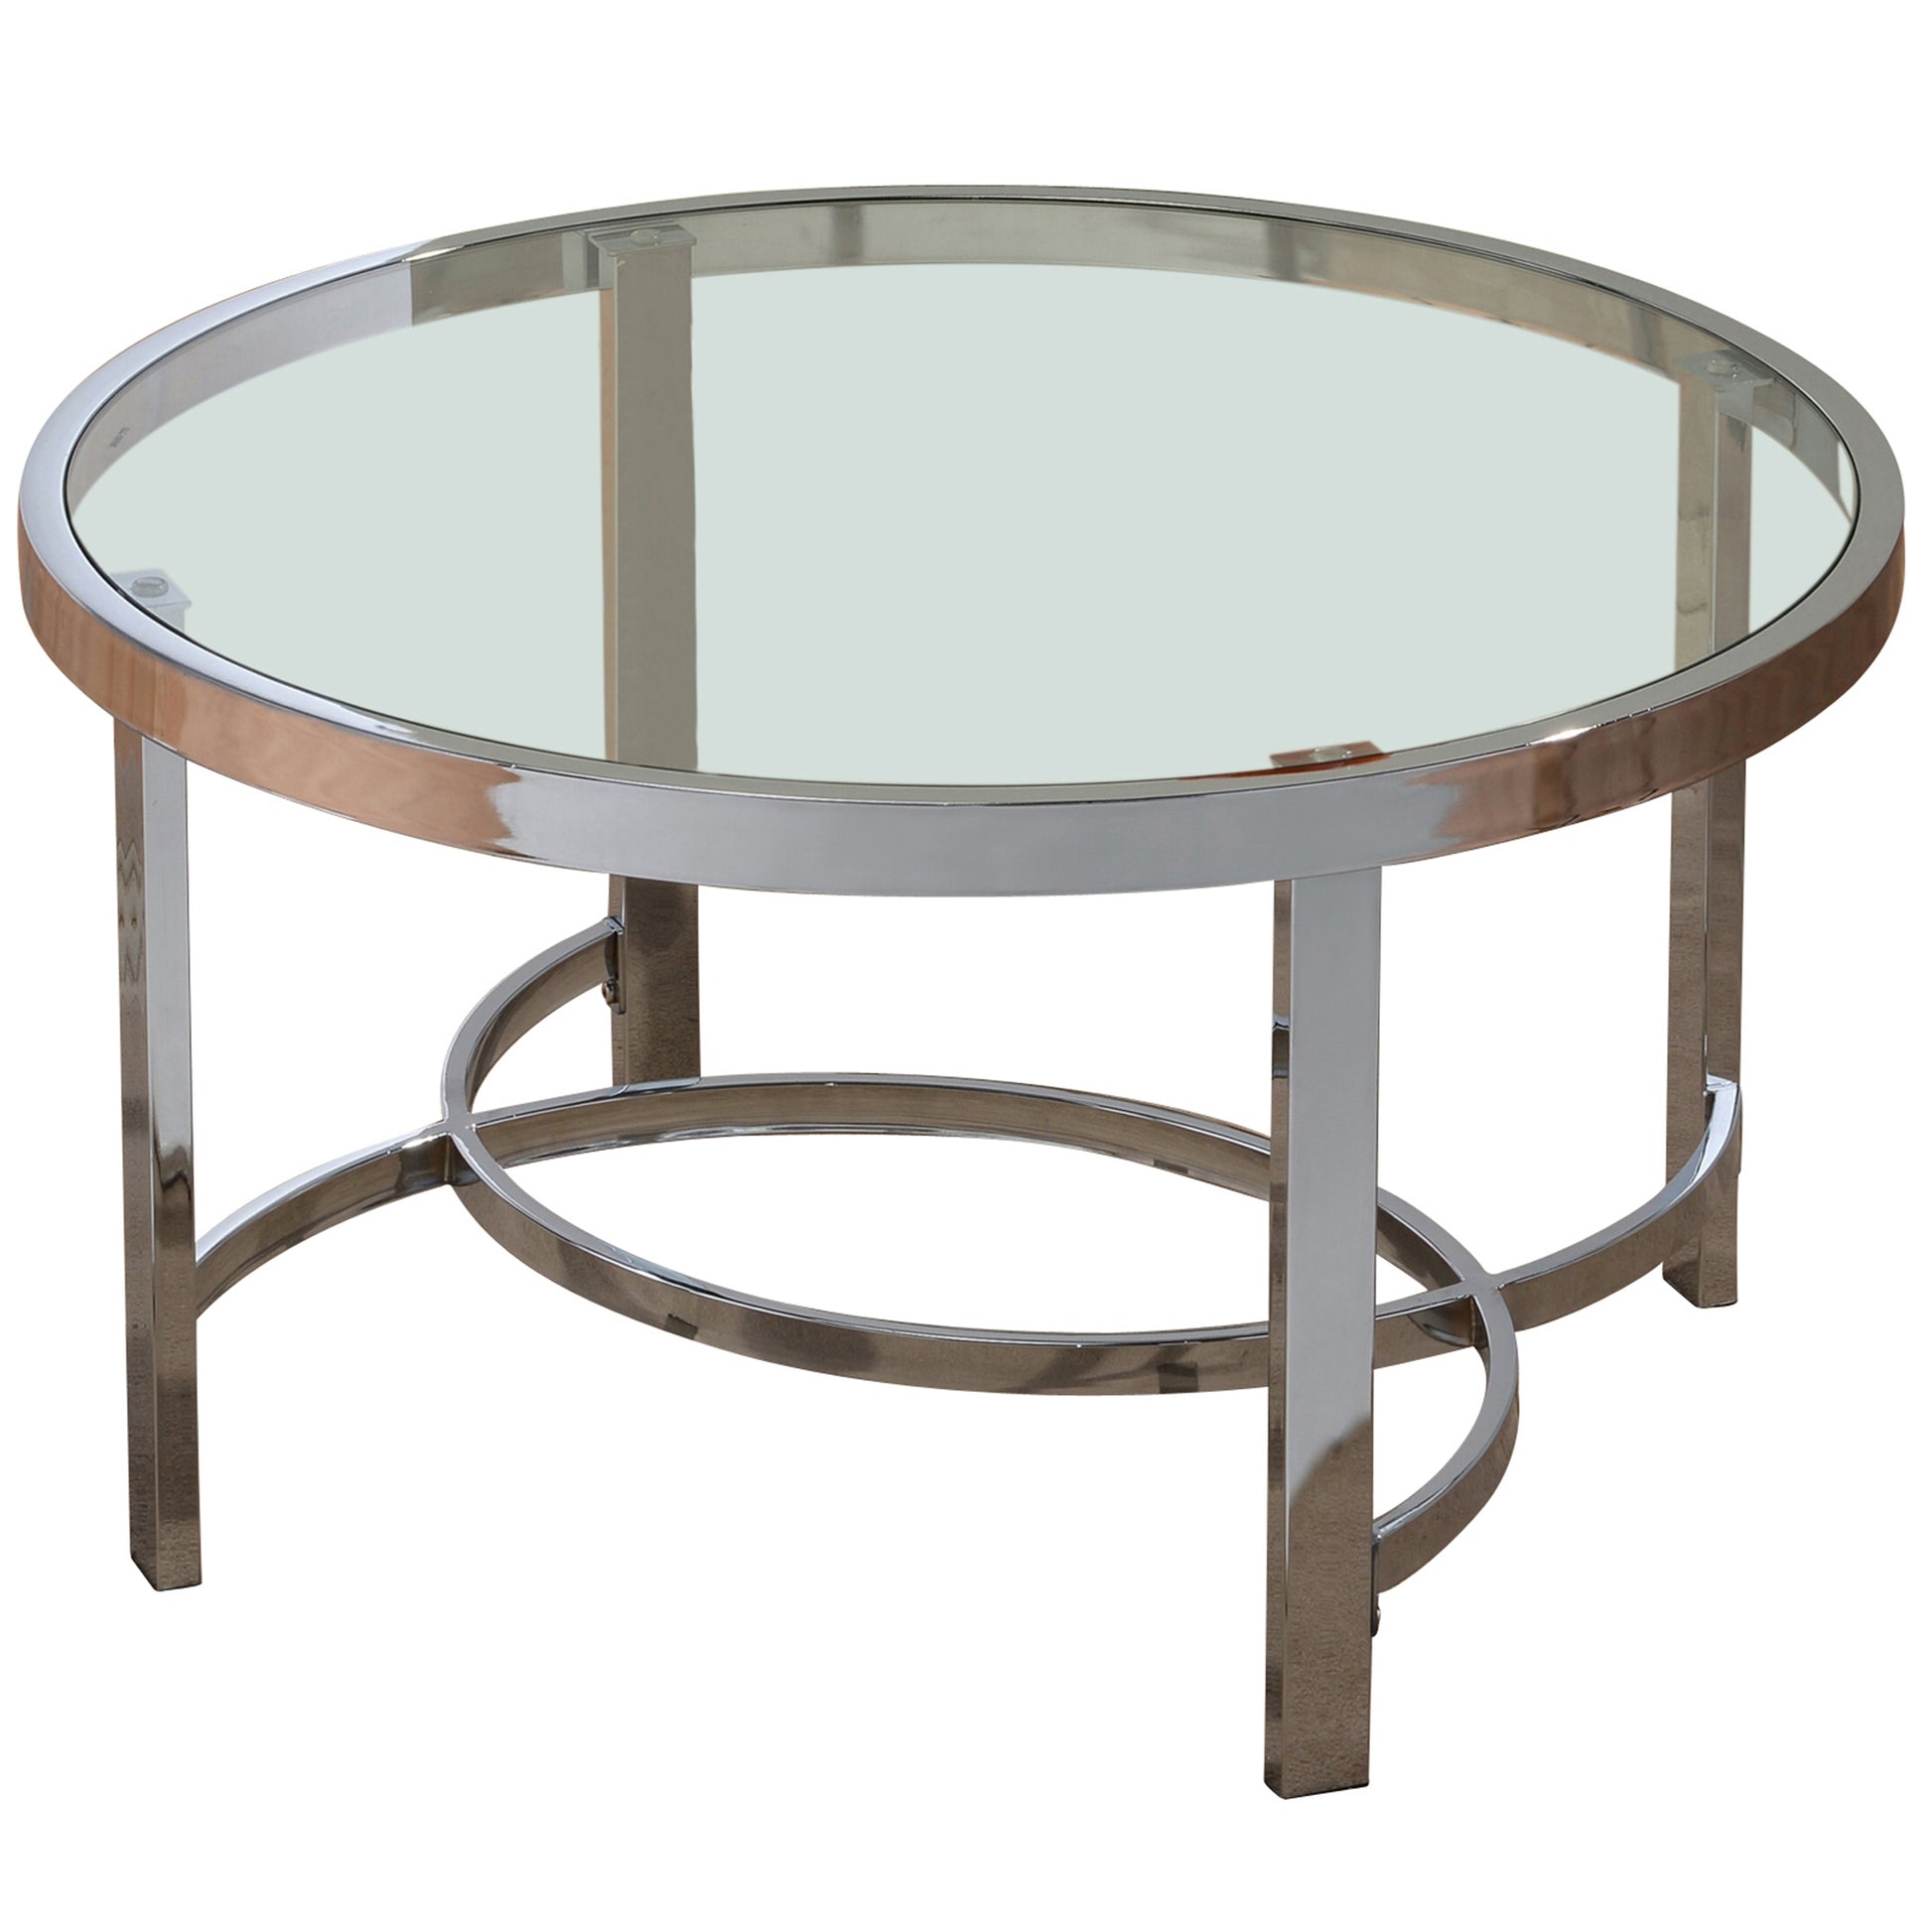 Strata Coffee Table in Chrome - Dreamart Gallery